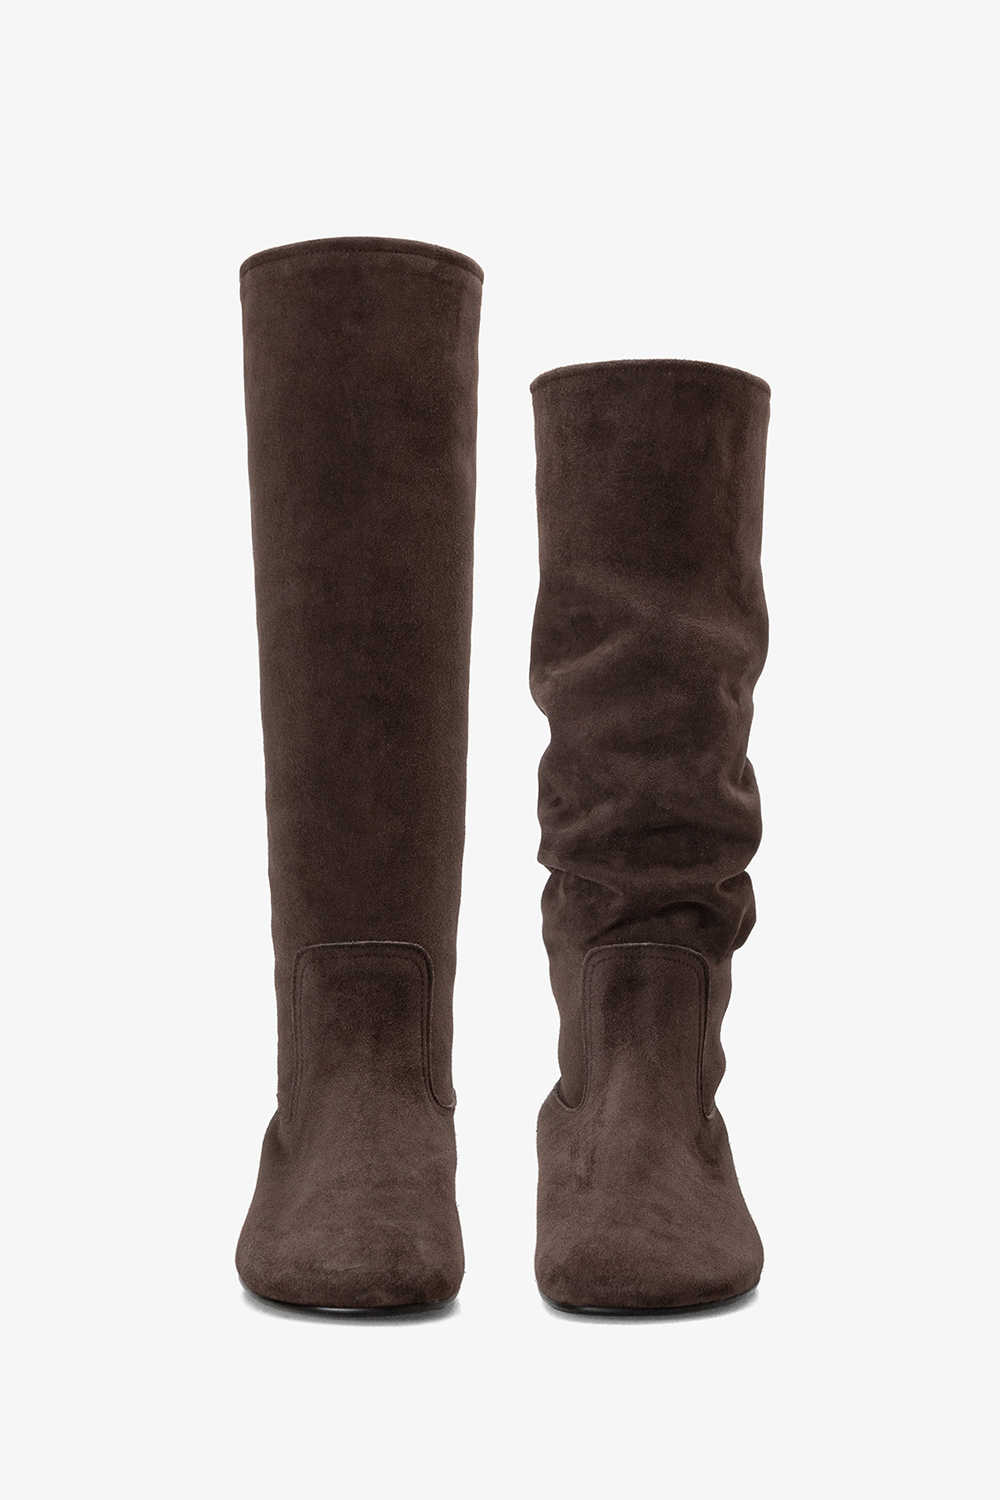 Wrinkle Boots in Chocolate Brown